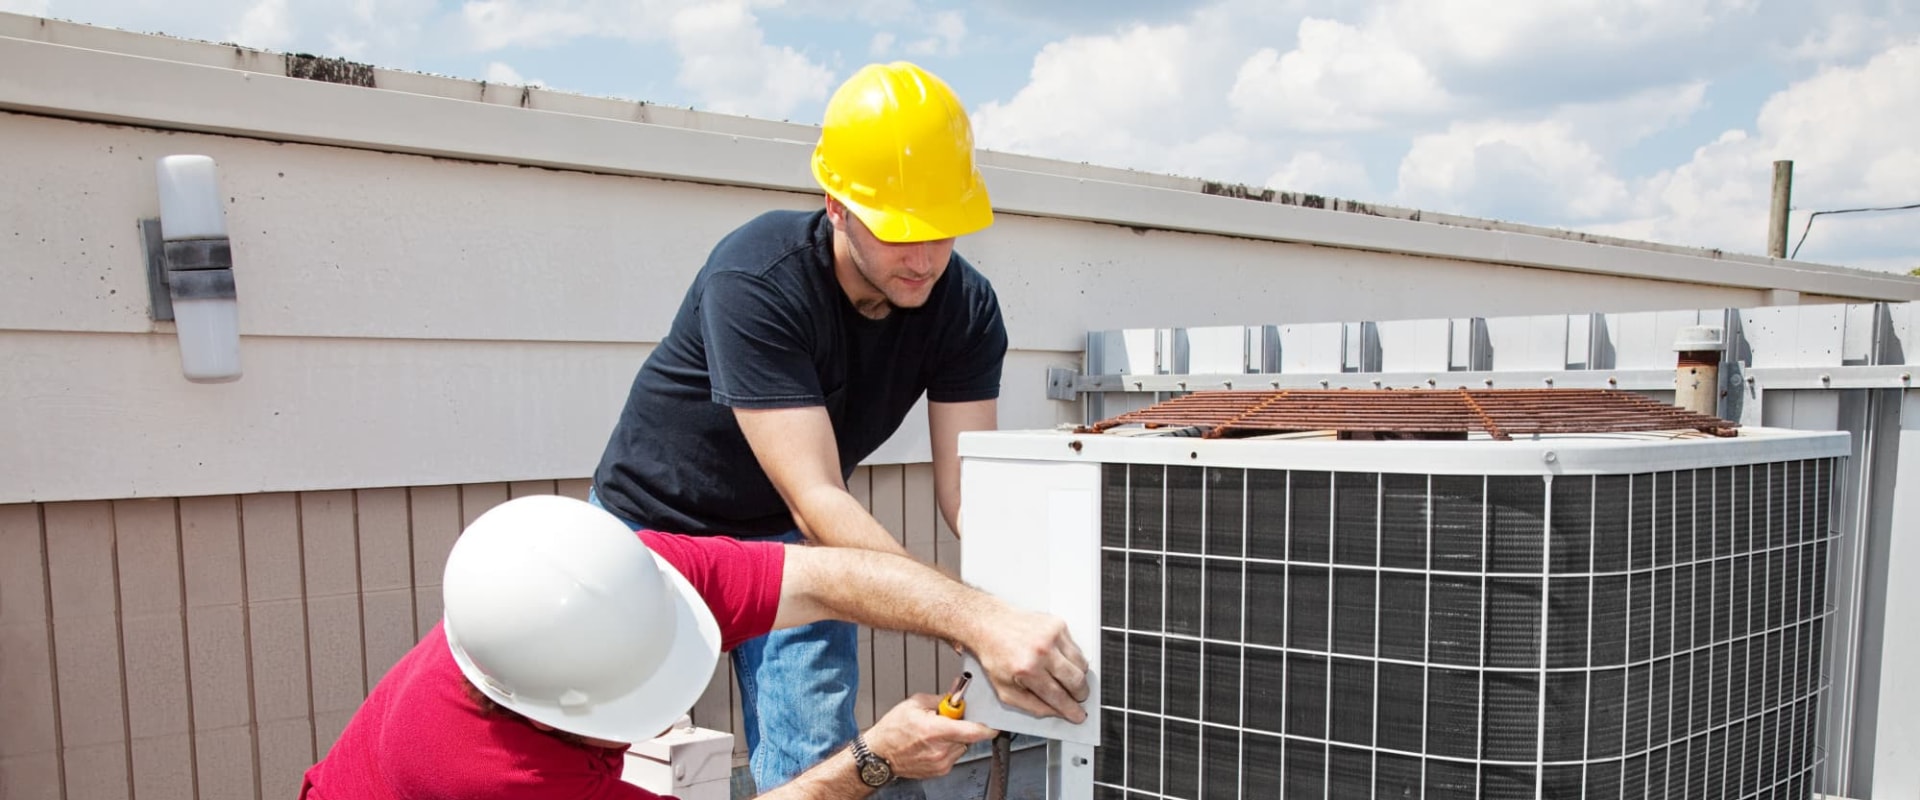 What is the maintenance checklist for hvac system?